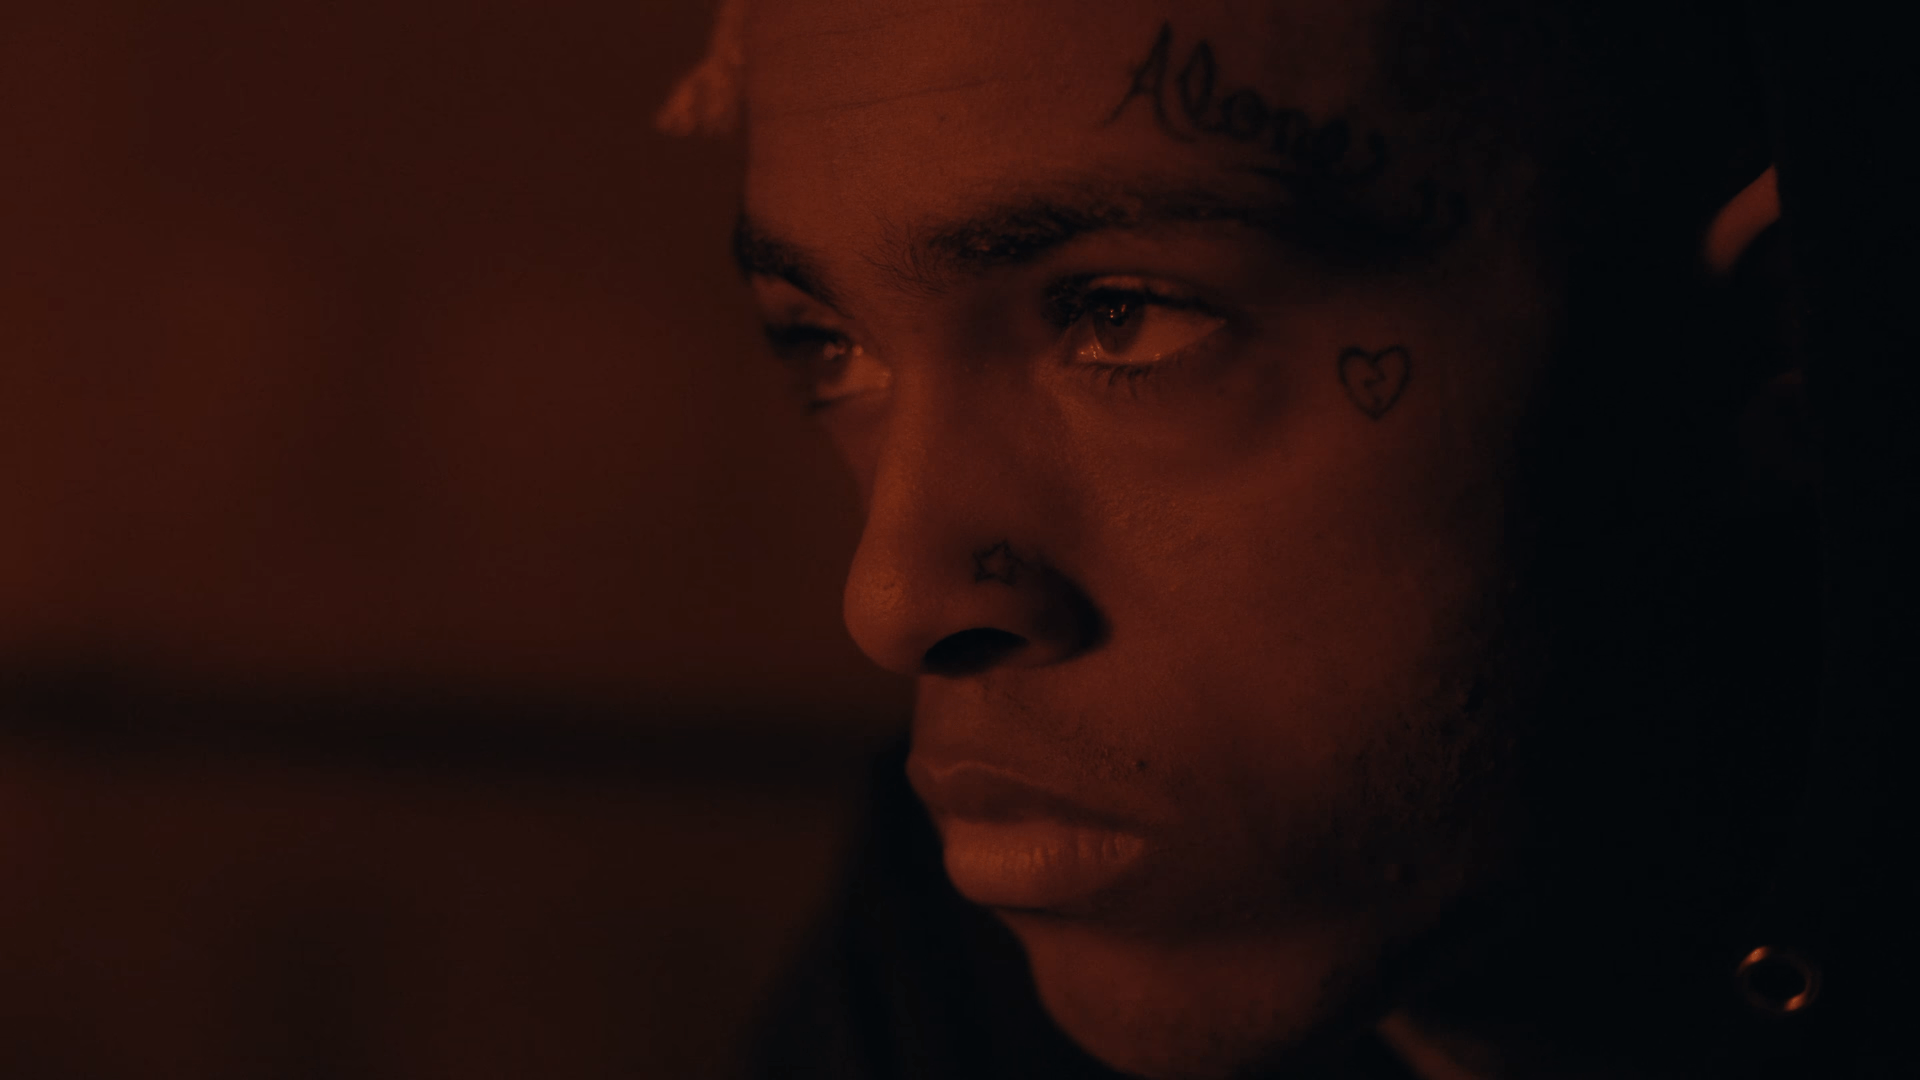 X wallpaper from the LookAtMe! / Riot music video 1920x1080